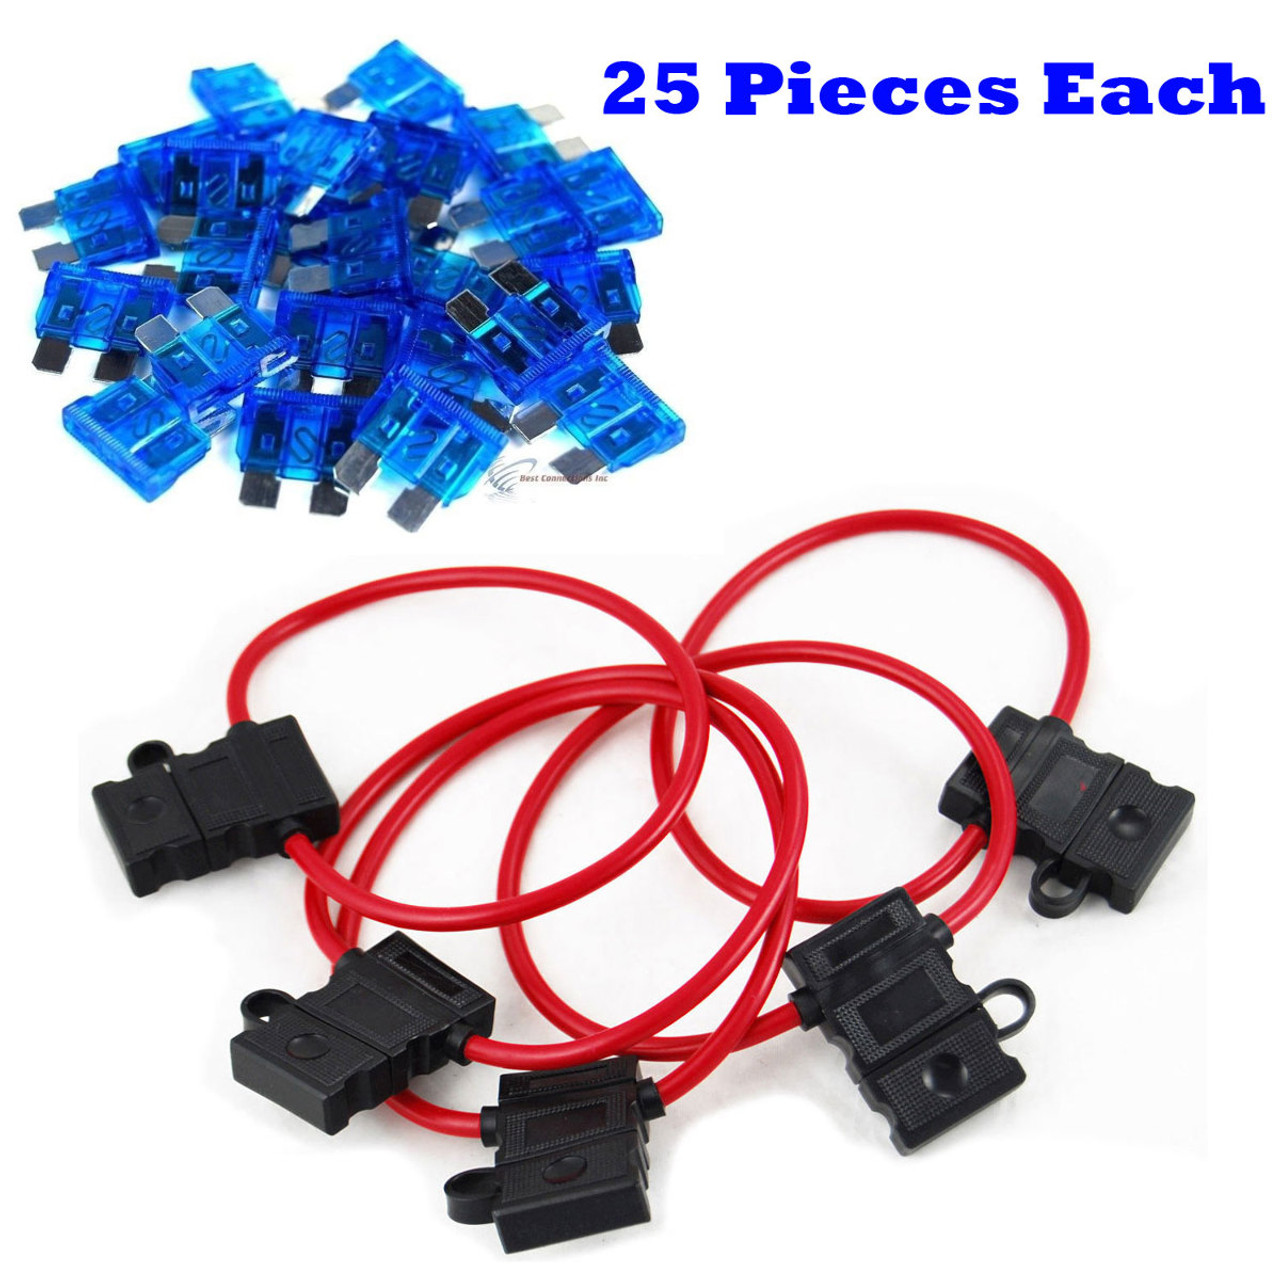 25 Pieces 10 Gauge In-Line ATC/ATO Fuse Holder  15 Amp ATC Blade Fuses  Best Connections